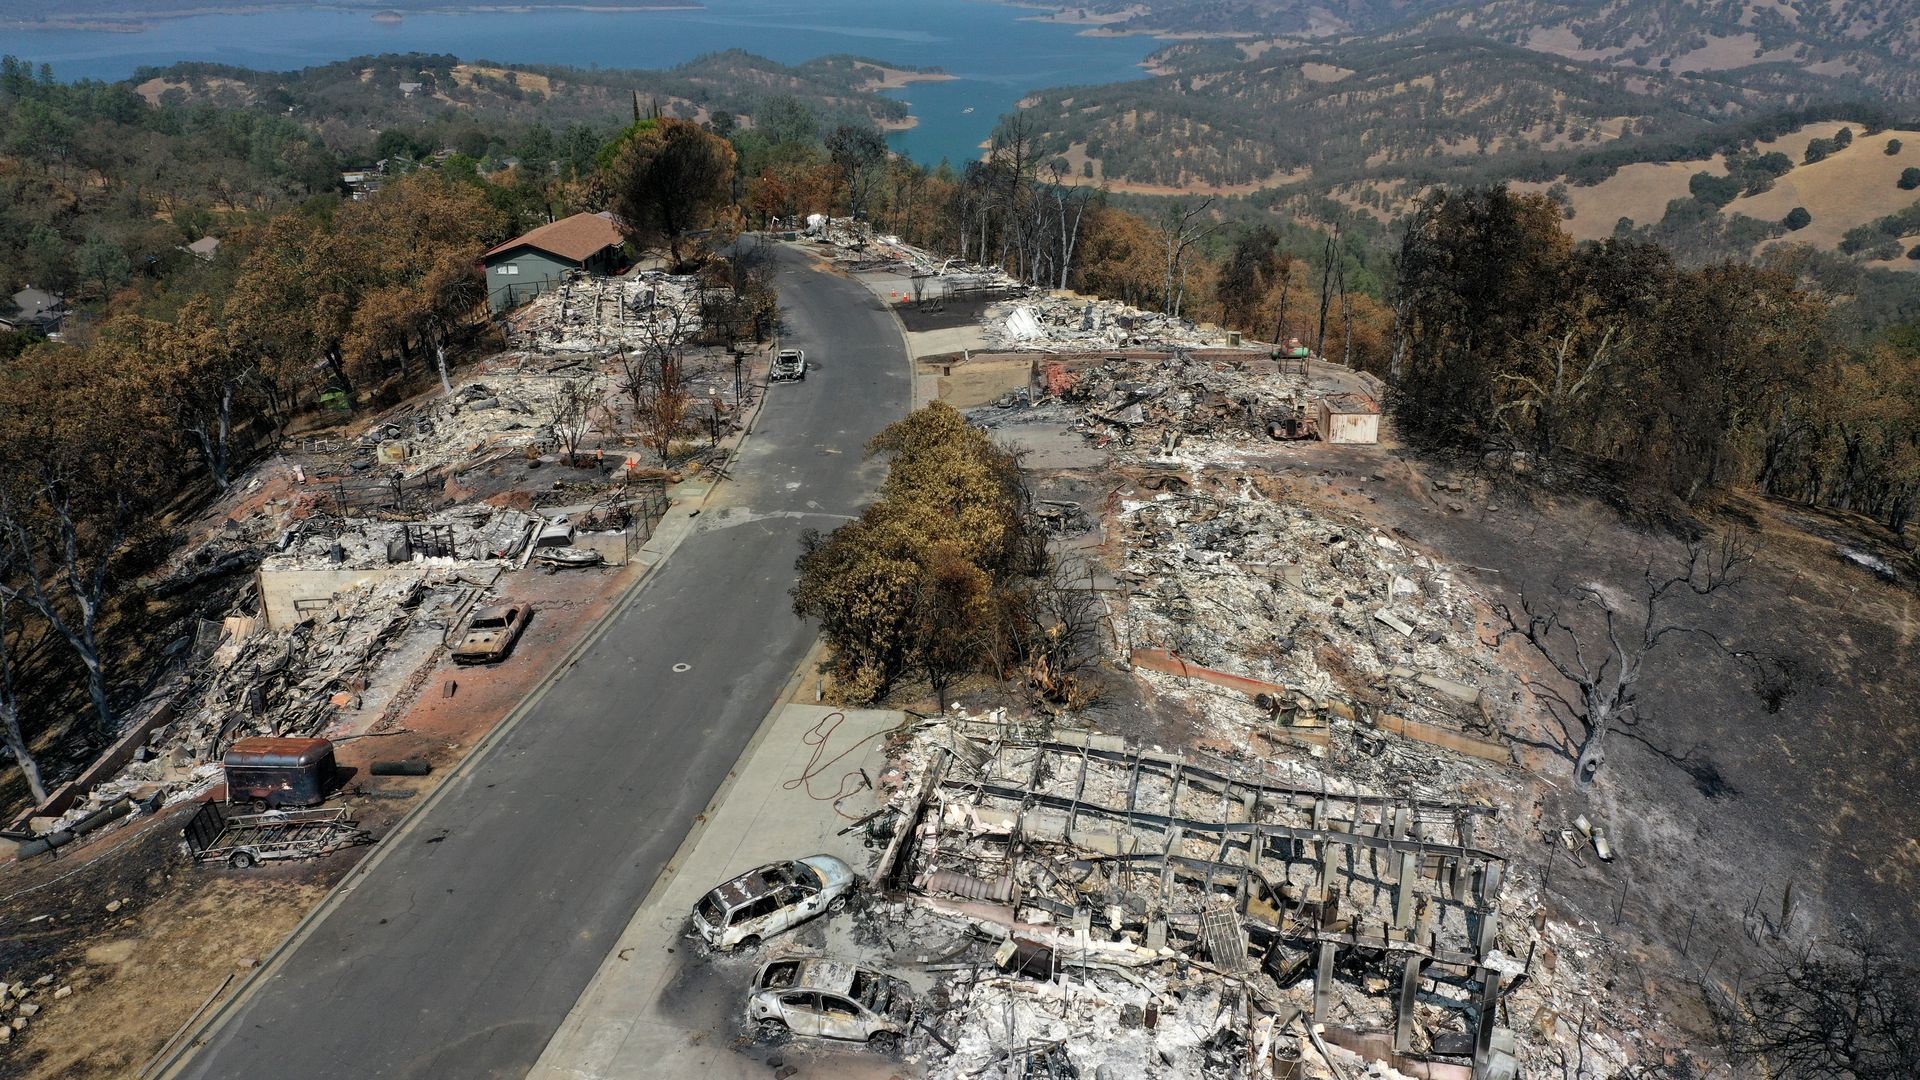 Homes destroyed by the now-mostly contained Hennessey Fire in Napa, California, on Sept. 15. The fire has burned over 315,000 acres, razed 633 structures and killed five people,